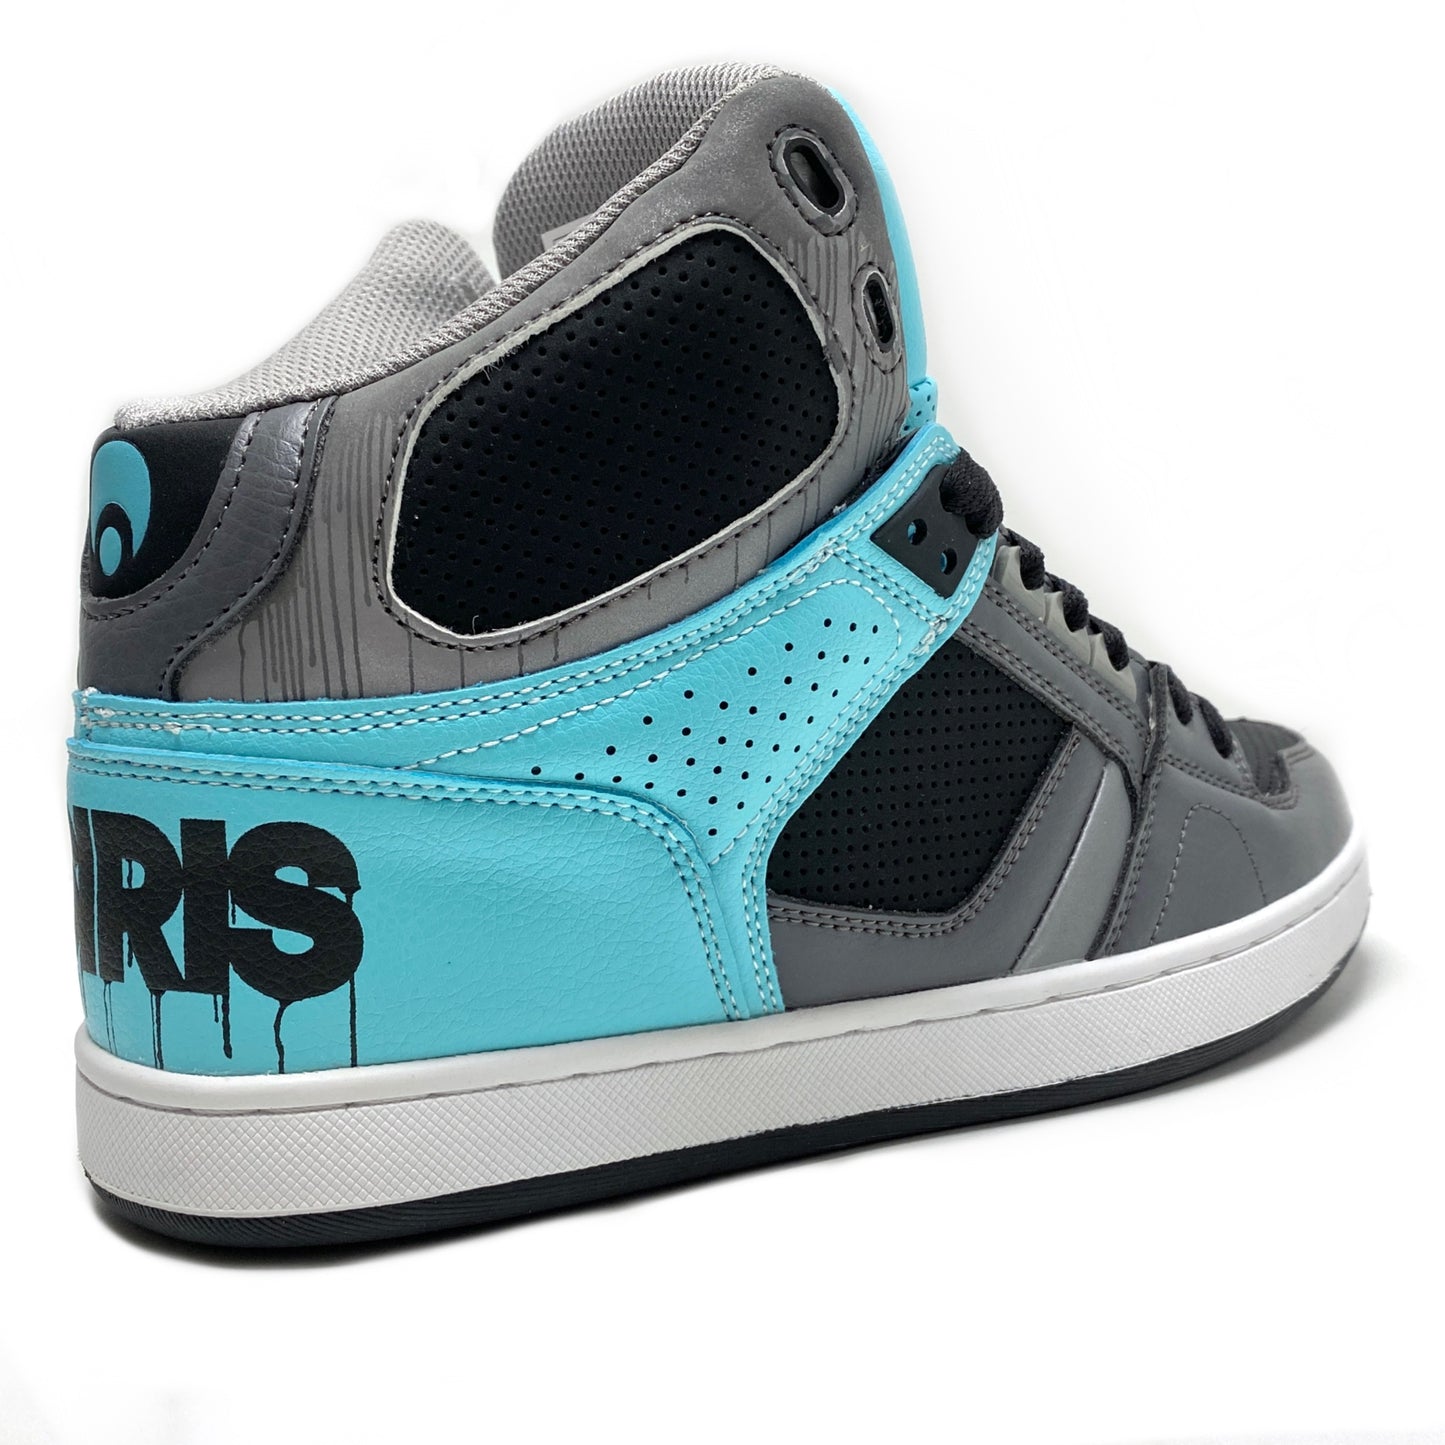 OSIRIS SHOES NYC 83 CLK BLACK TEAL DRIPS TRAINERS